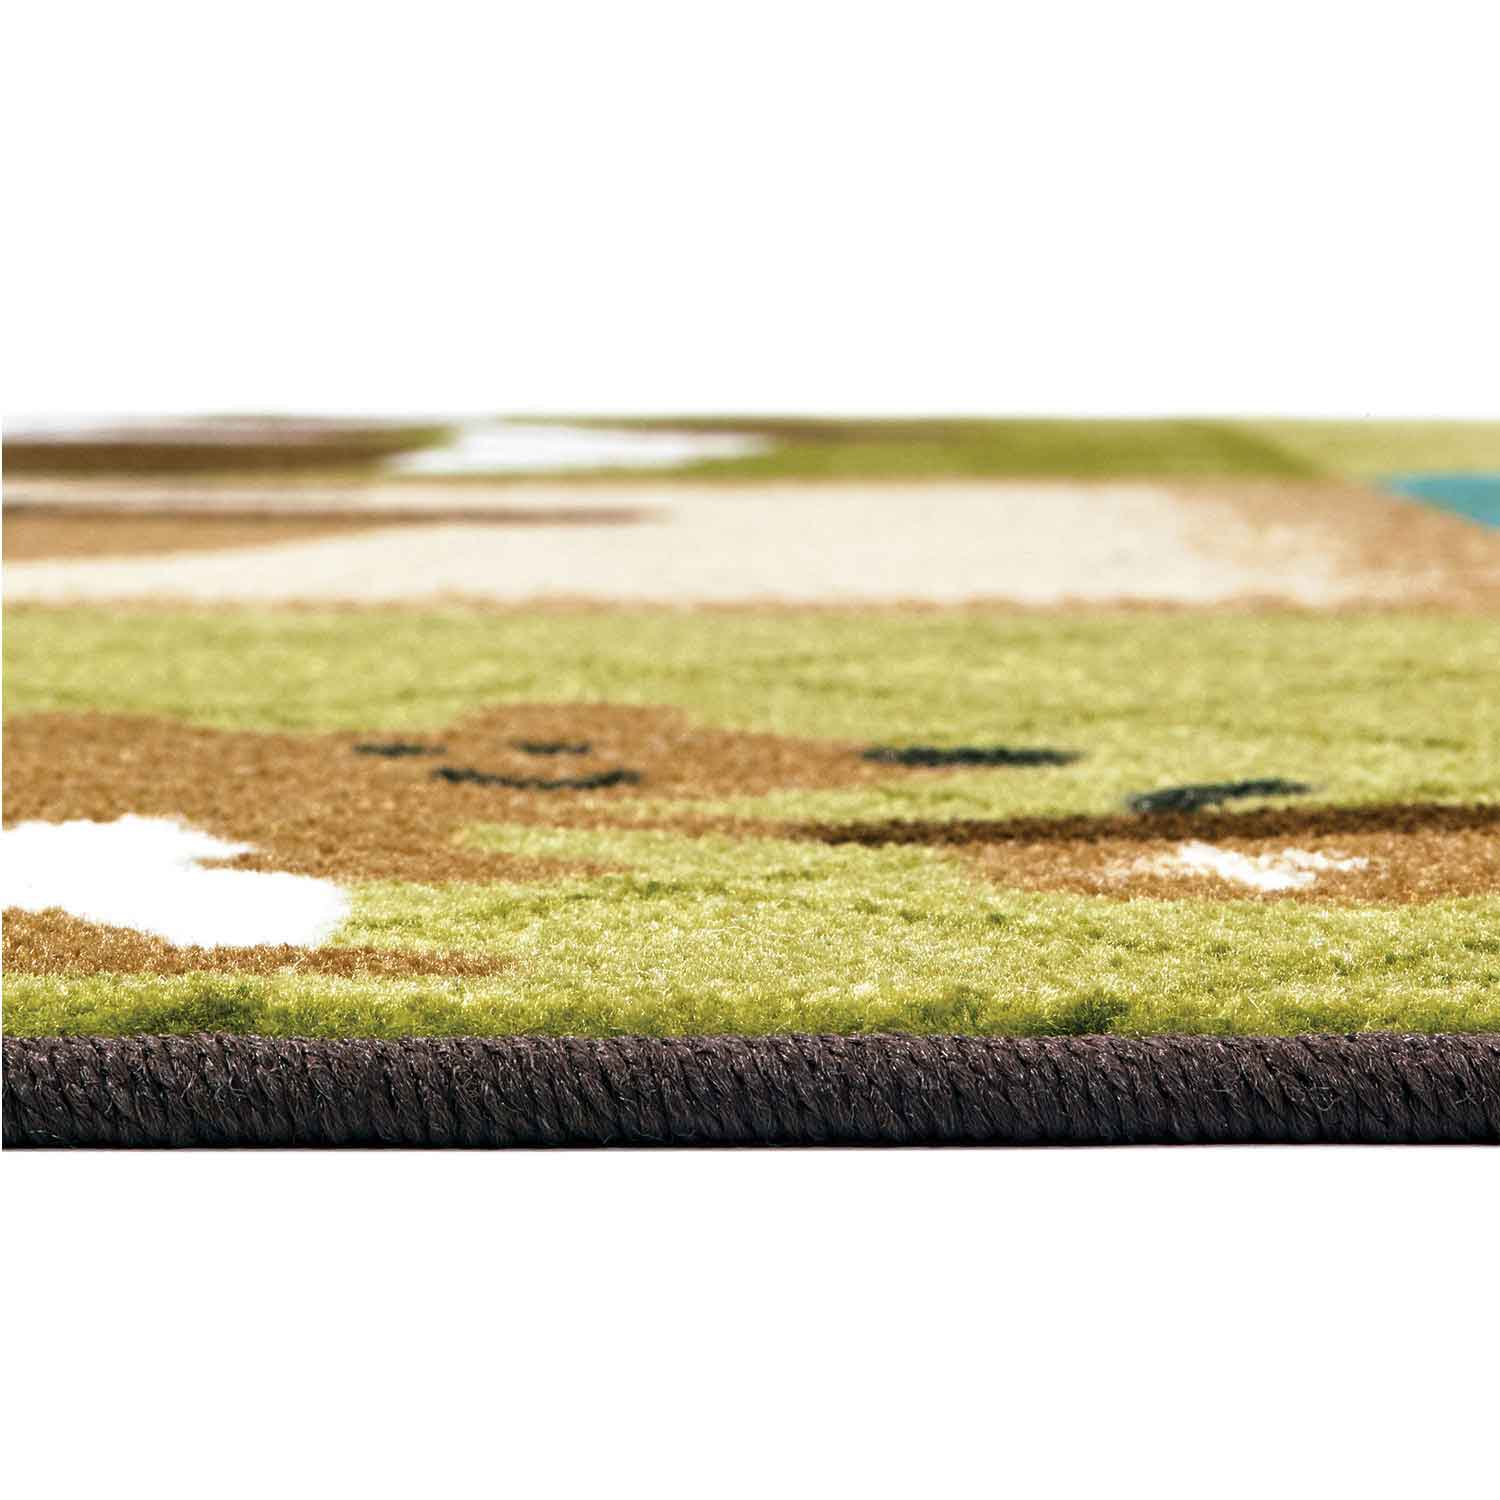 KIDSoft™ Nature's Friends Toddler Classroom Rug